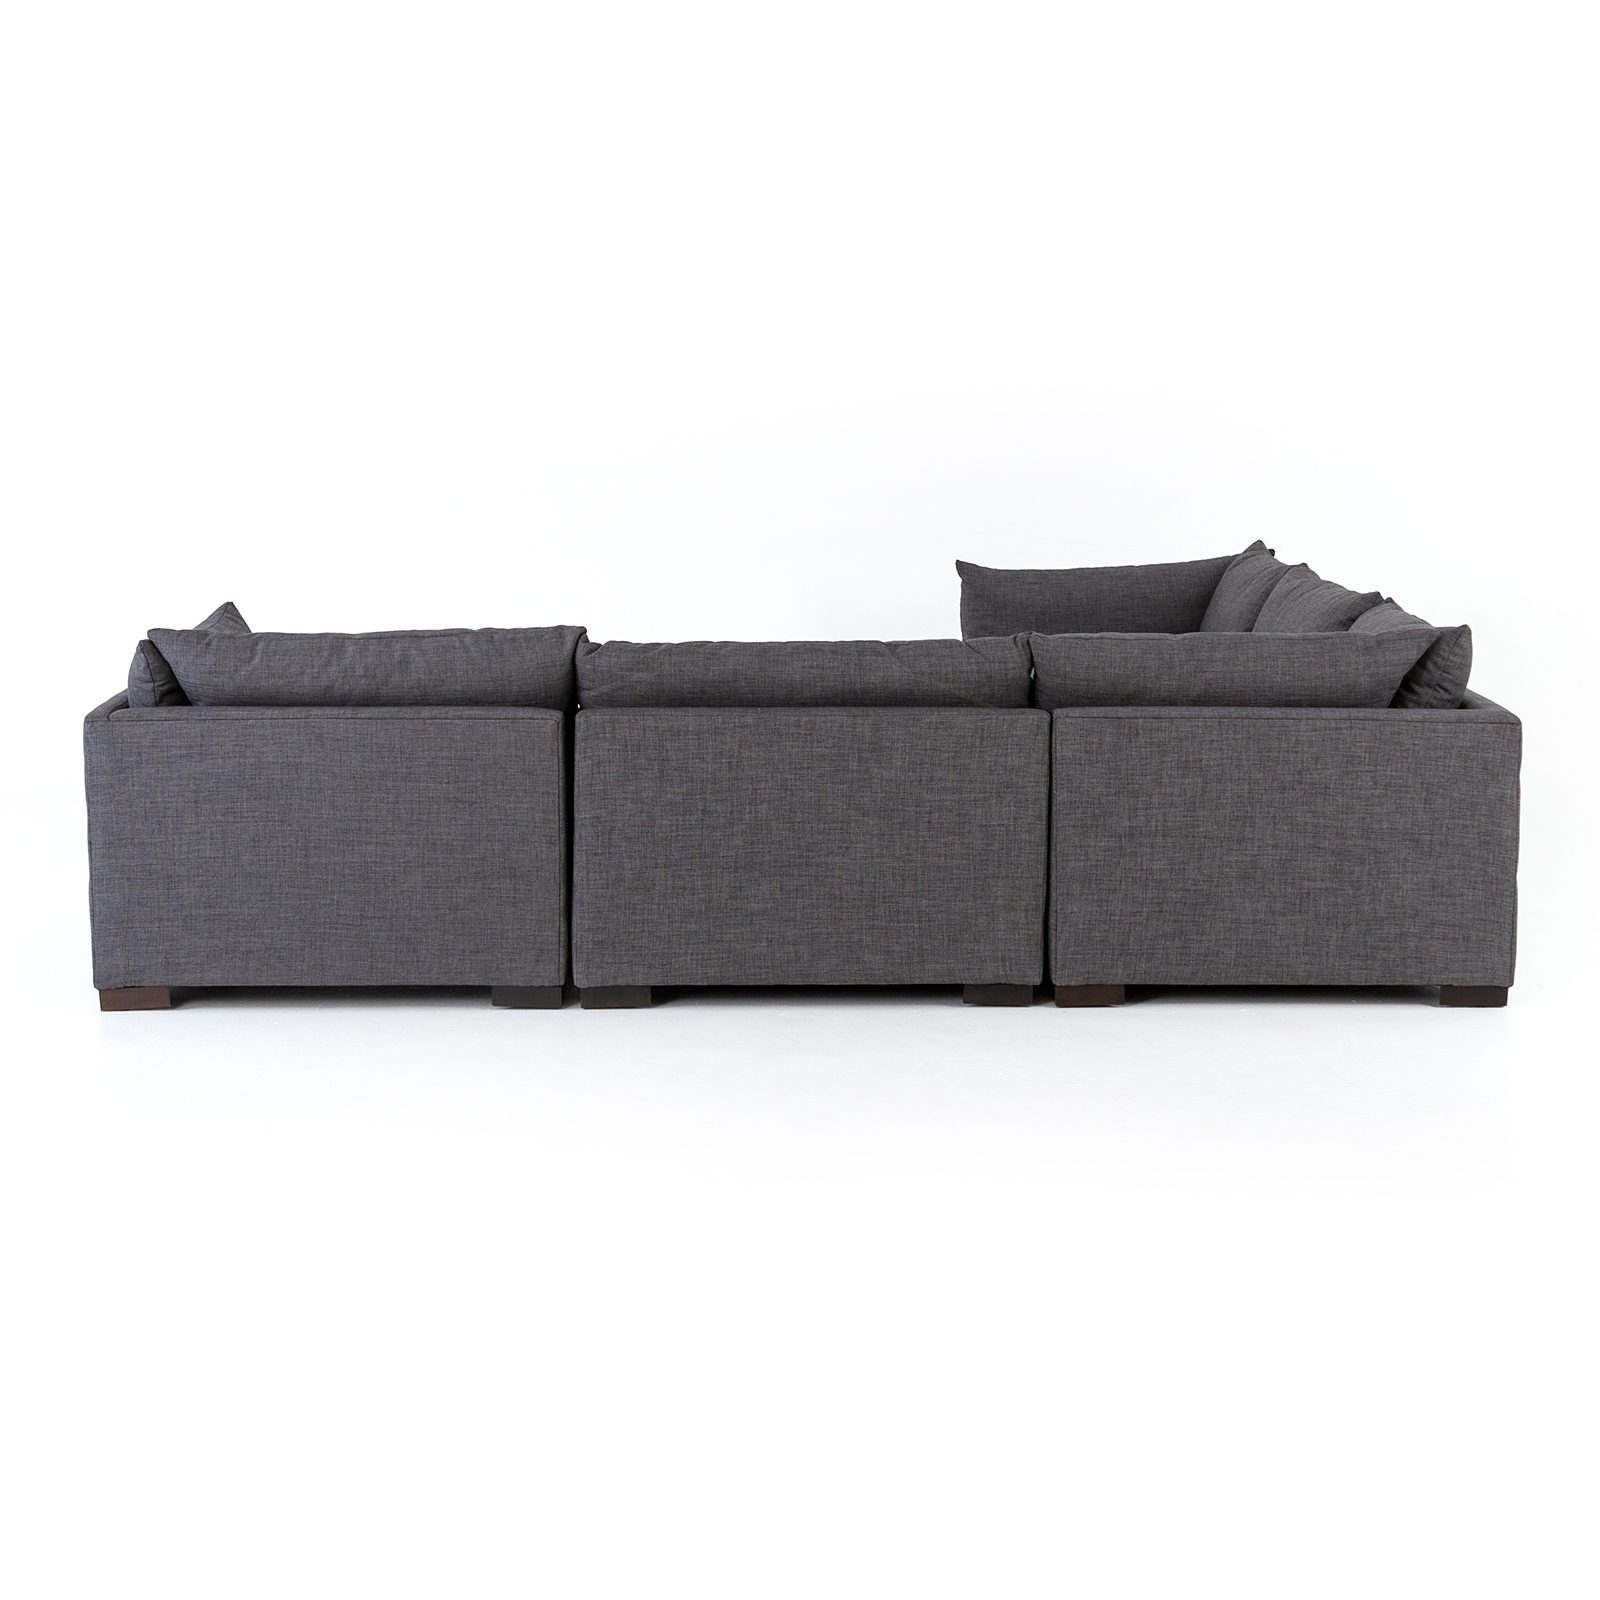 Woodson 5 Piece Sectional